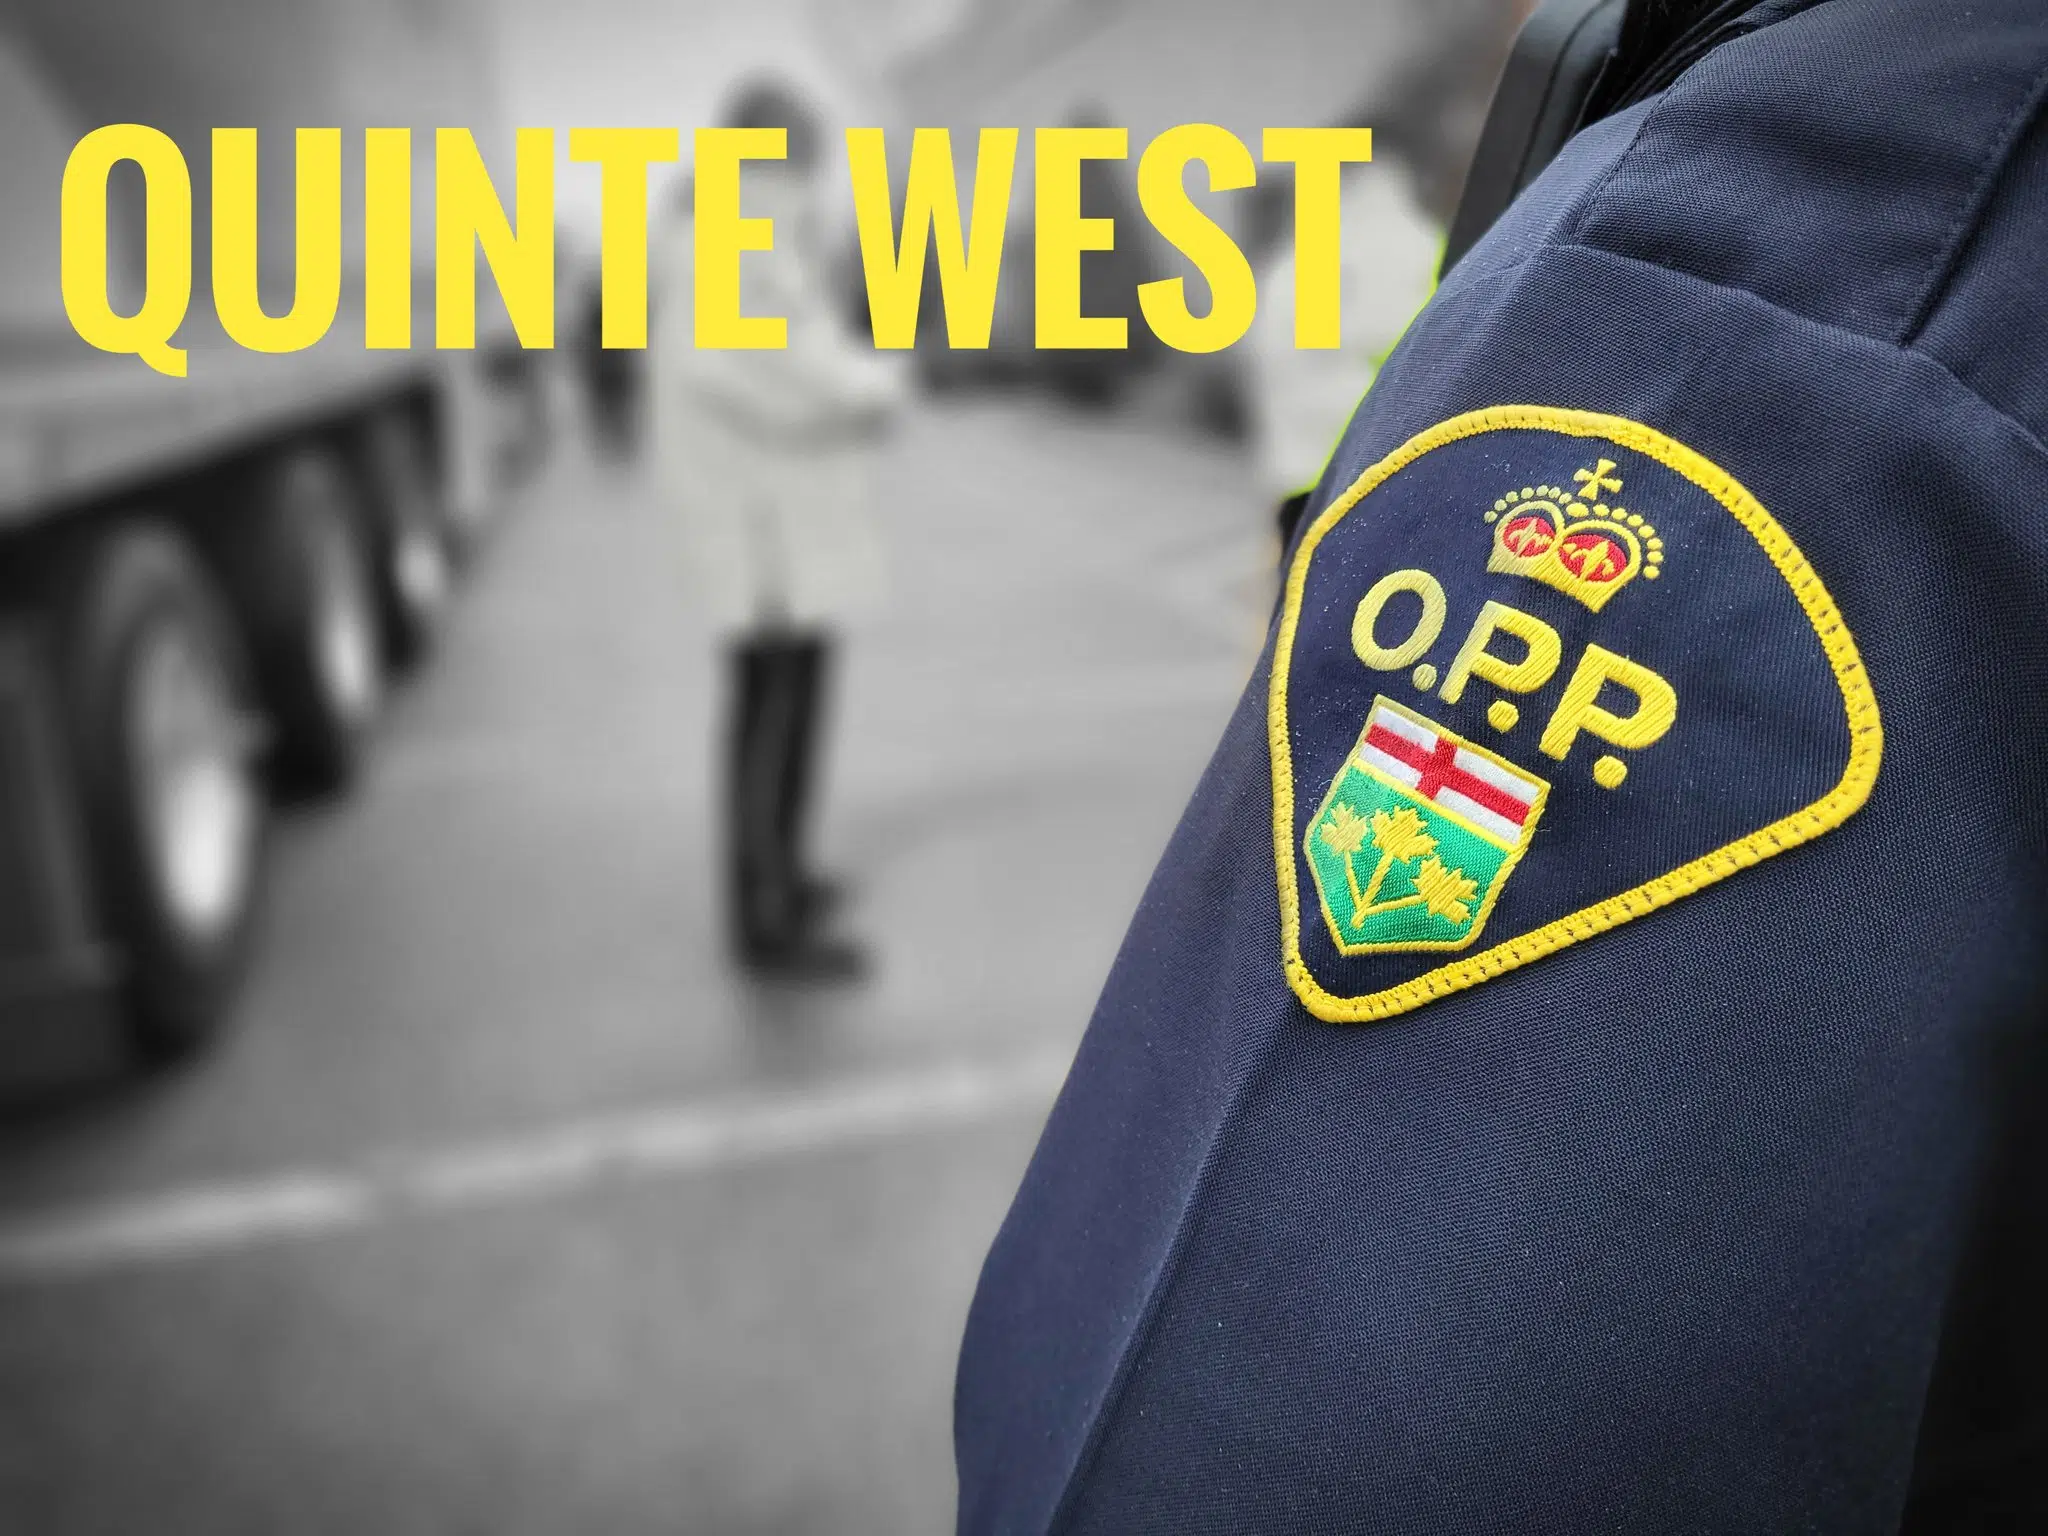 Impaired charges after vehicle strikes house in Quinte West